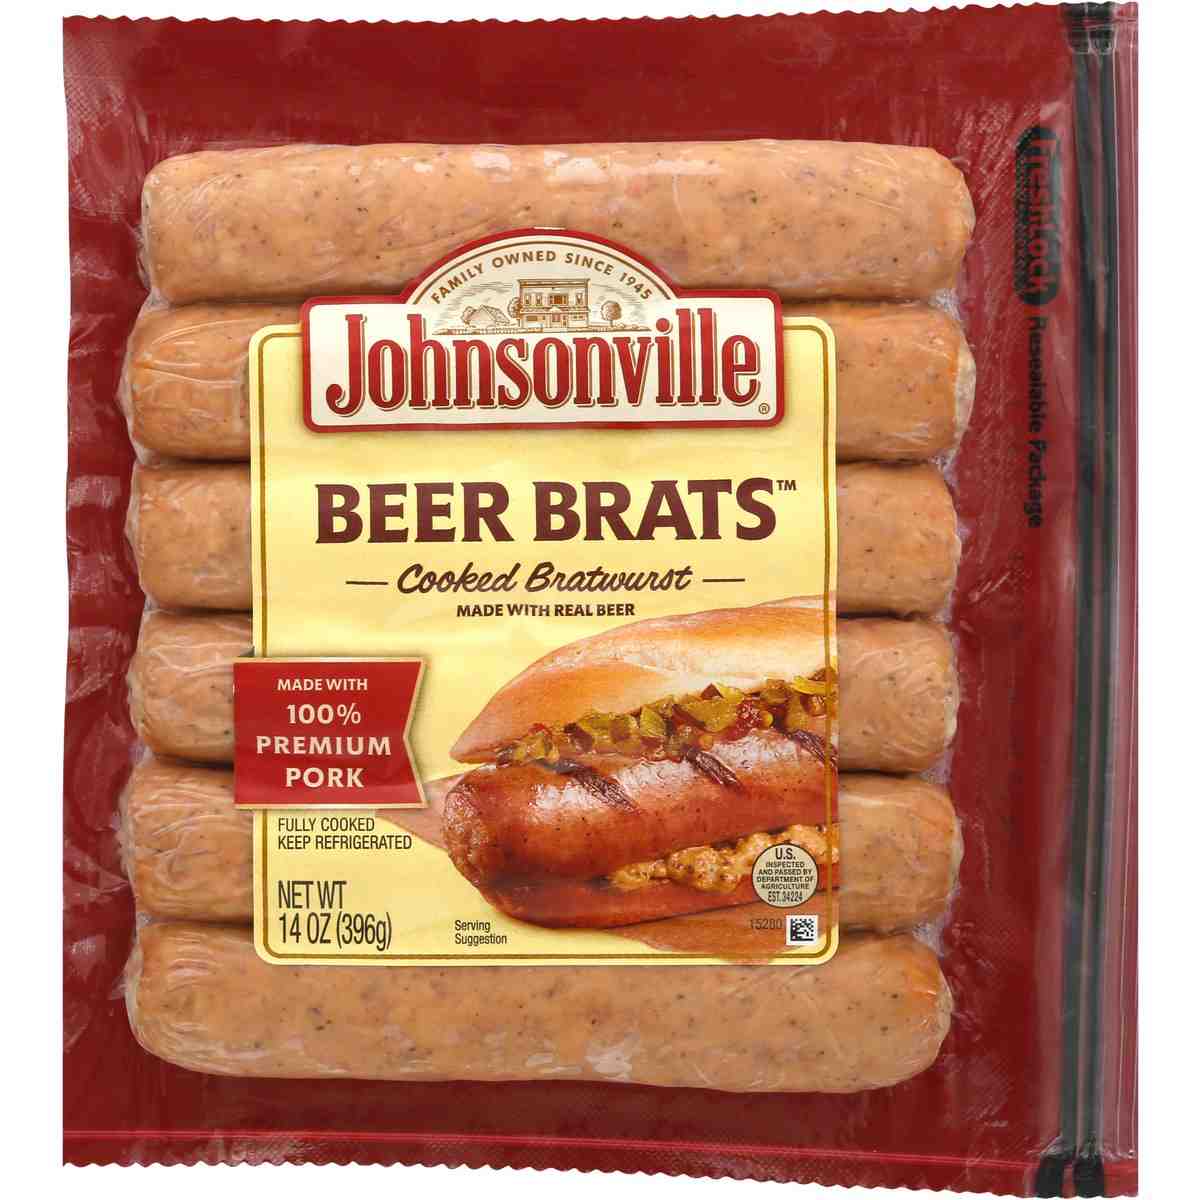 What part of the pig is bratwurst?